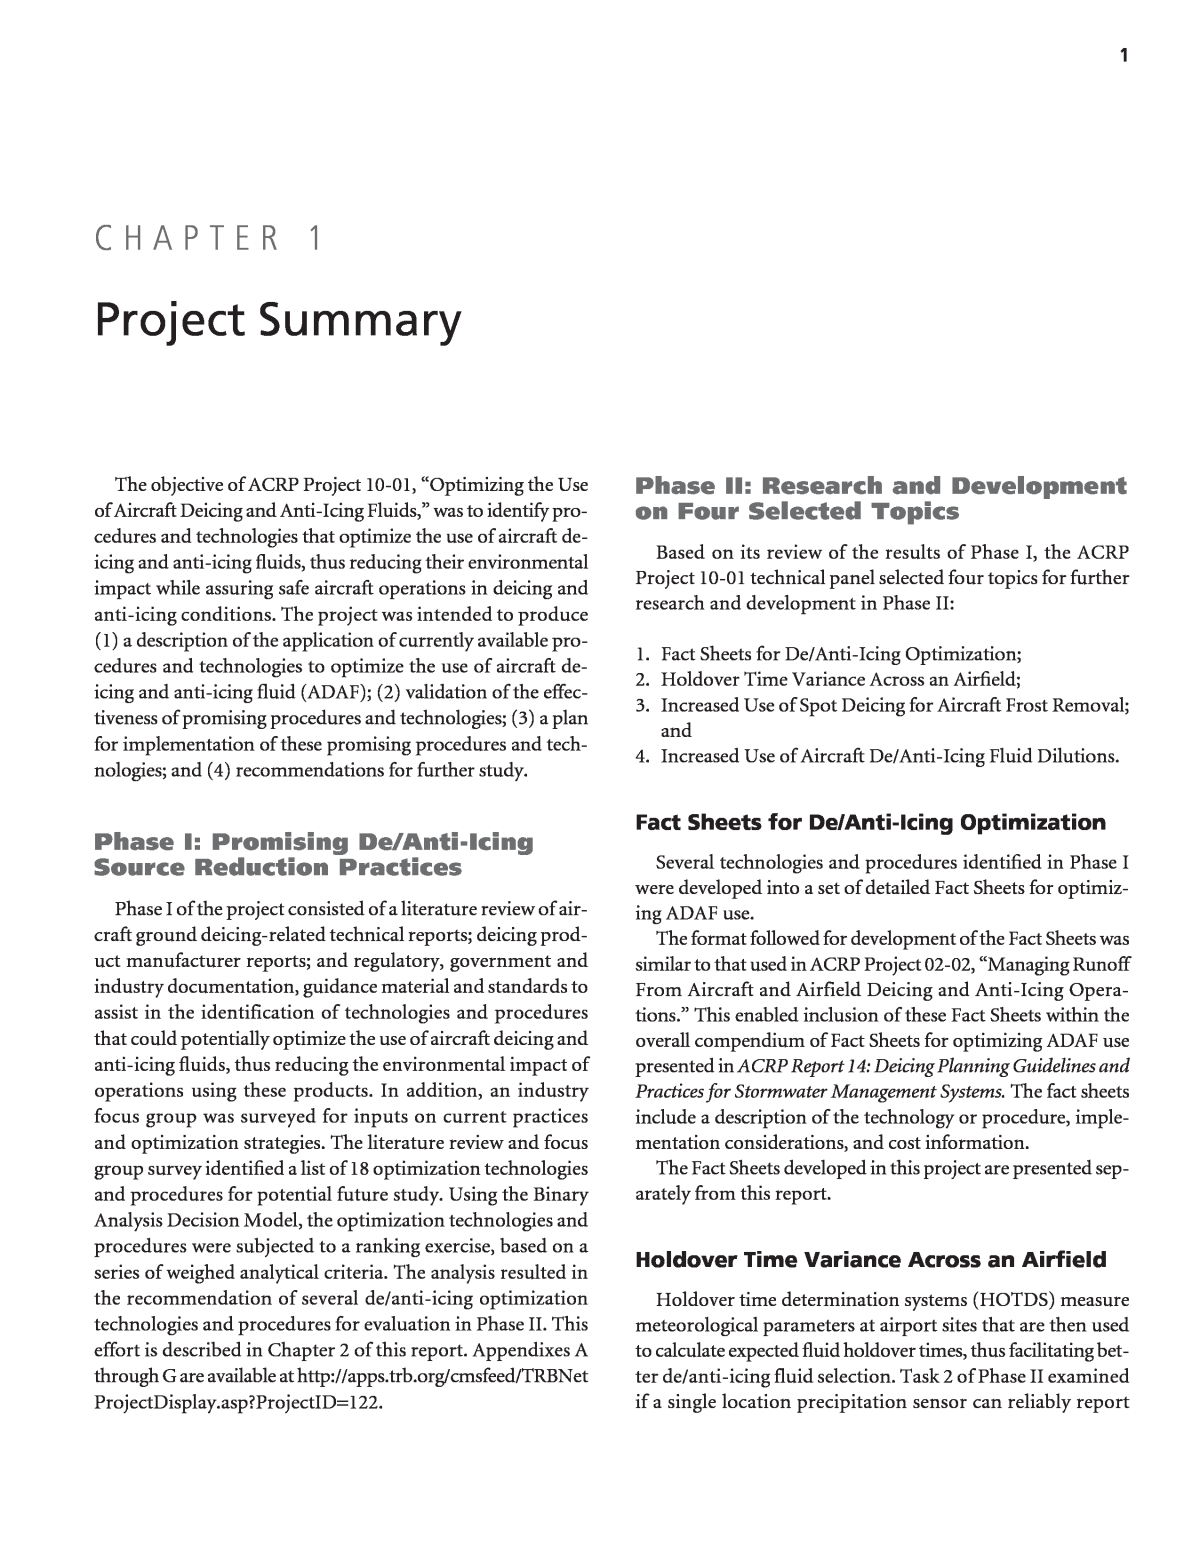 research project summary cihr example